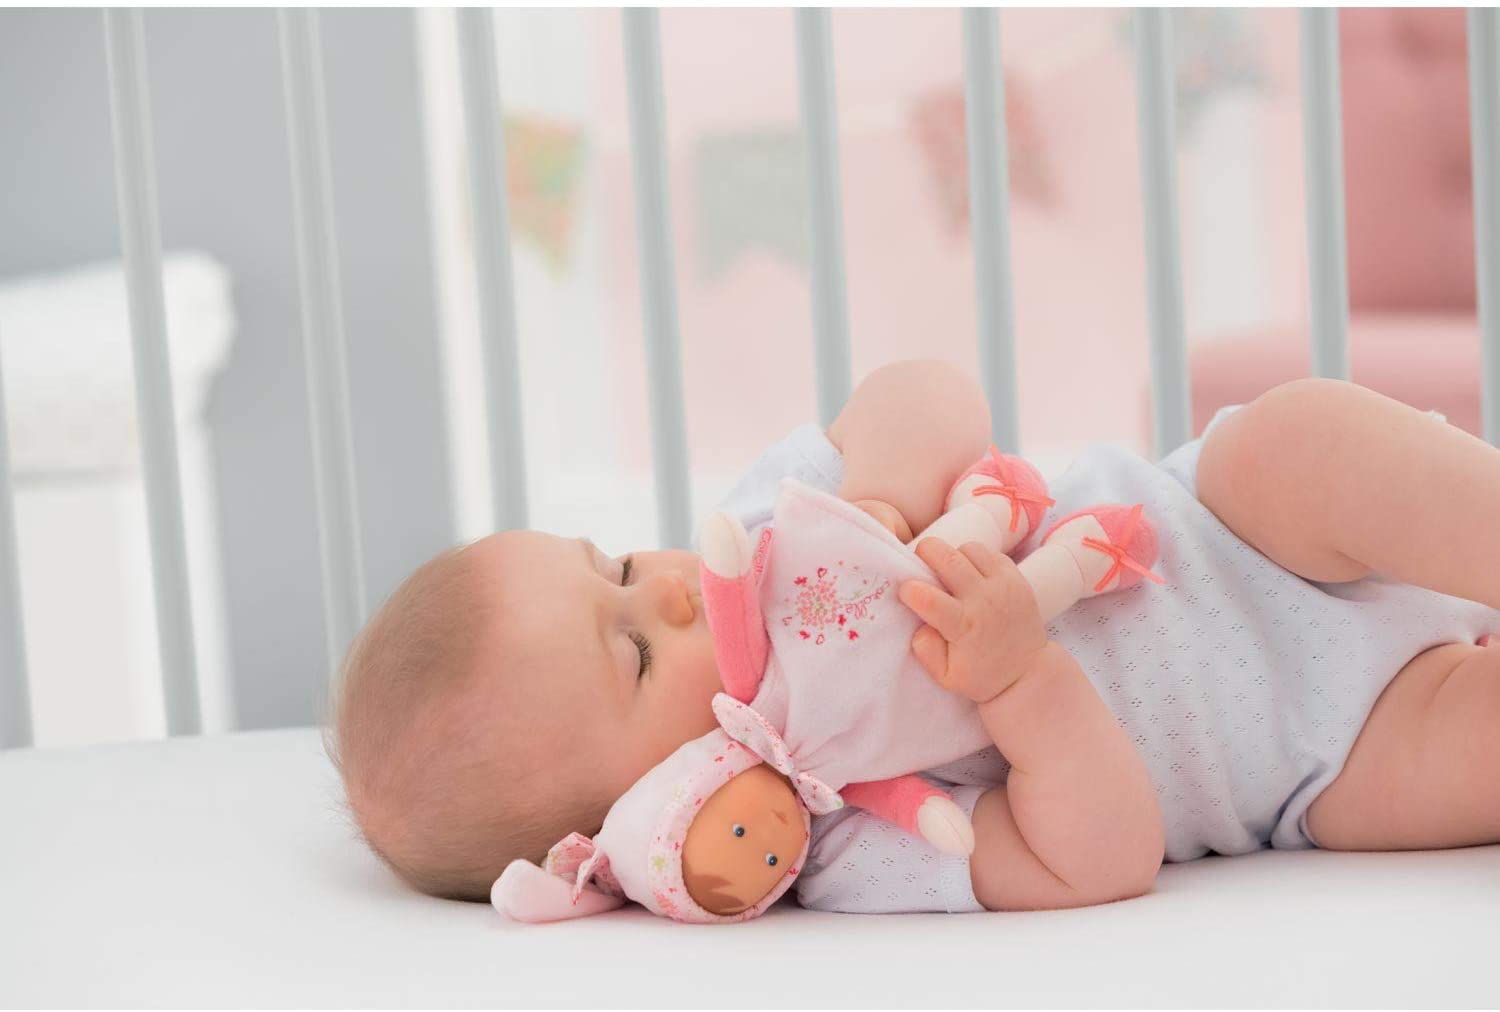 Corolle - Mon Doudou Miss Cotton Flower - Soft Body Baby Doll For Ages 0 Months & Up, Pink/White